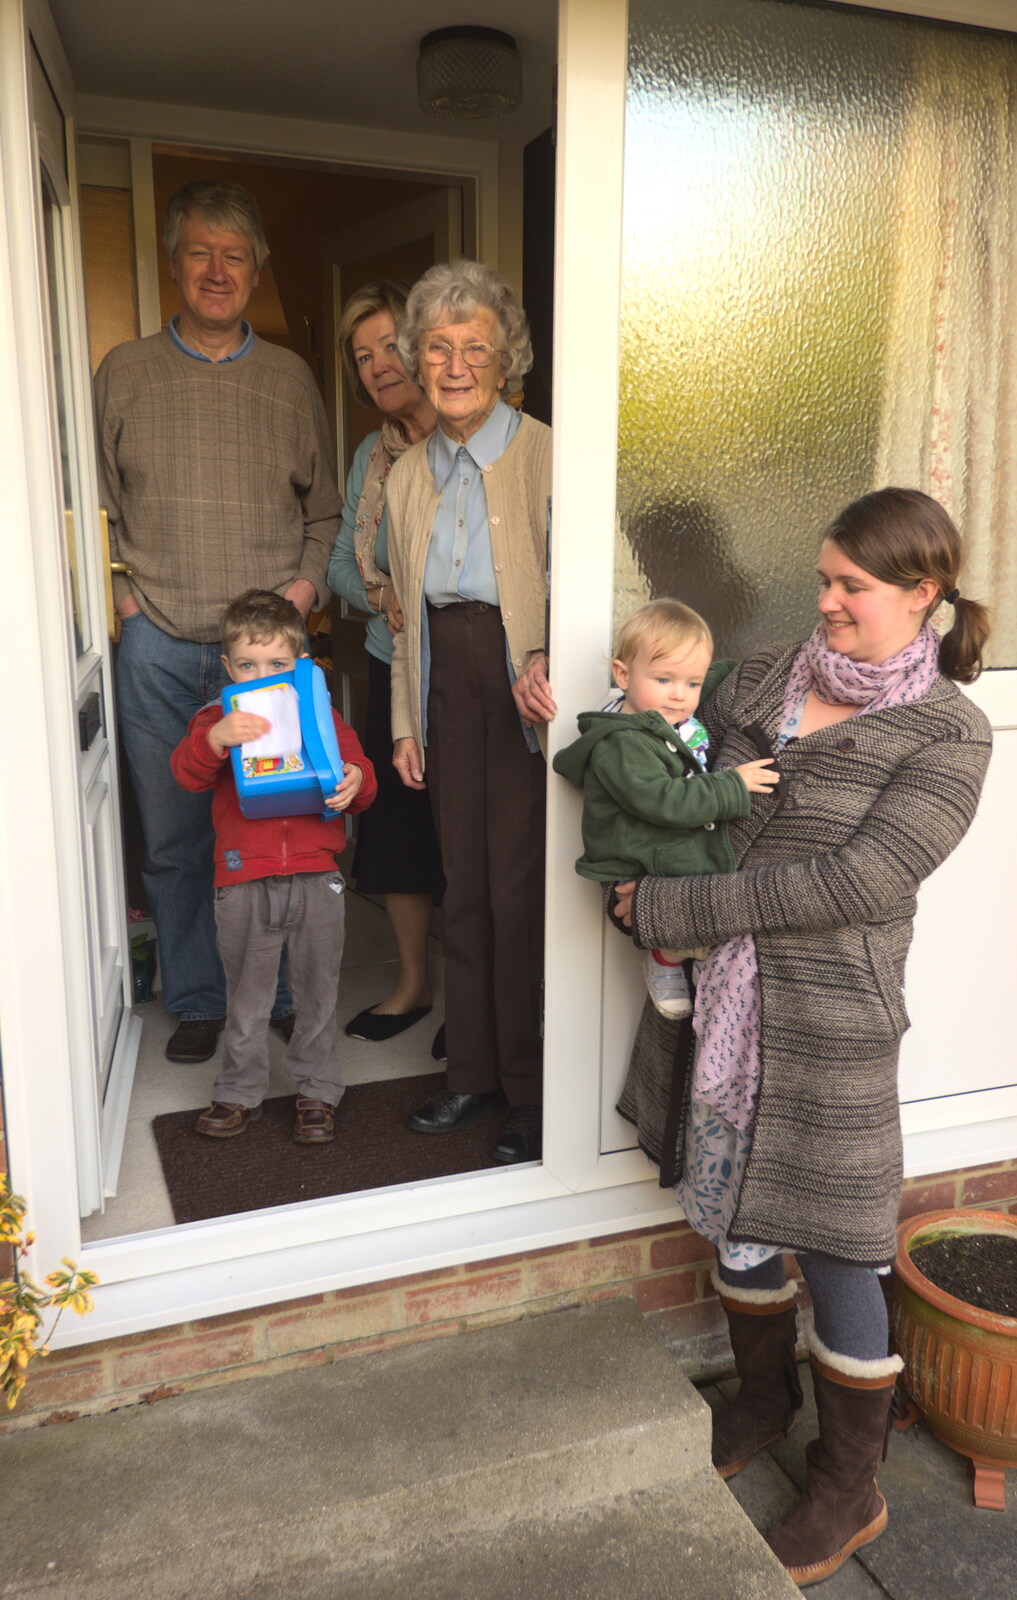 A family portrait by great-grandmother's door from Barton on Sea Beach, and a Trip to Christchurch, Hampshire and Dorset - 19th March 2013